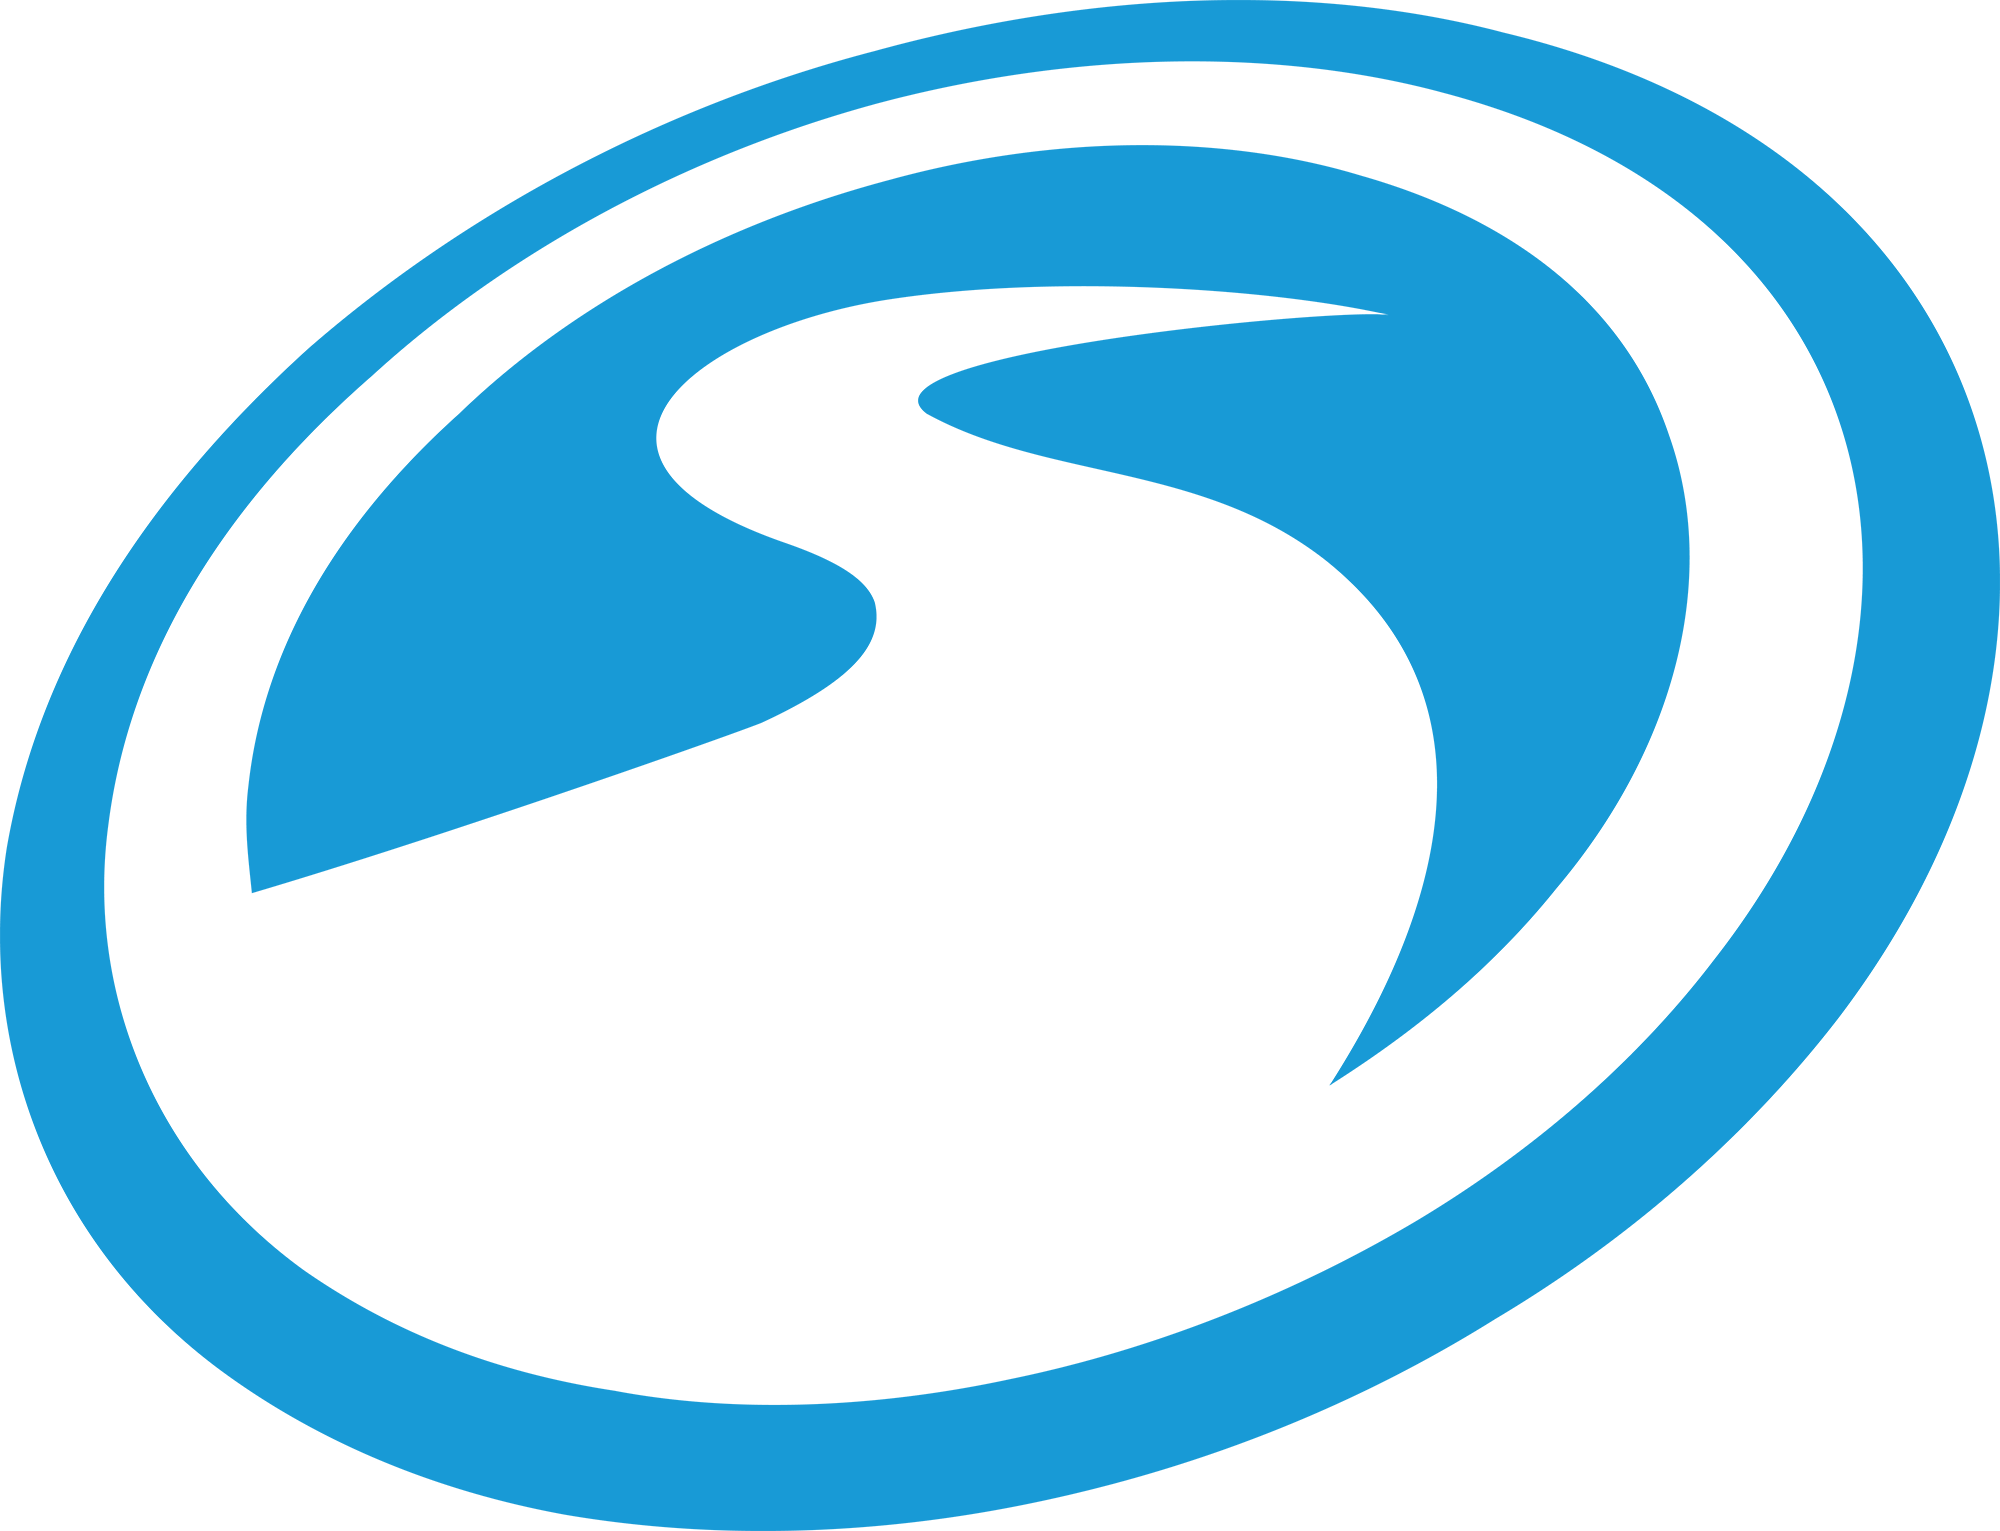 SnapStream logo representing an S in the shape of a river within an oblong circle